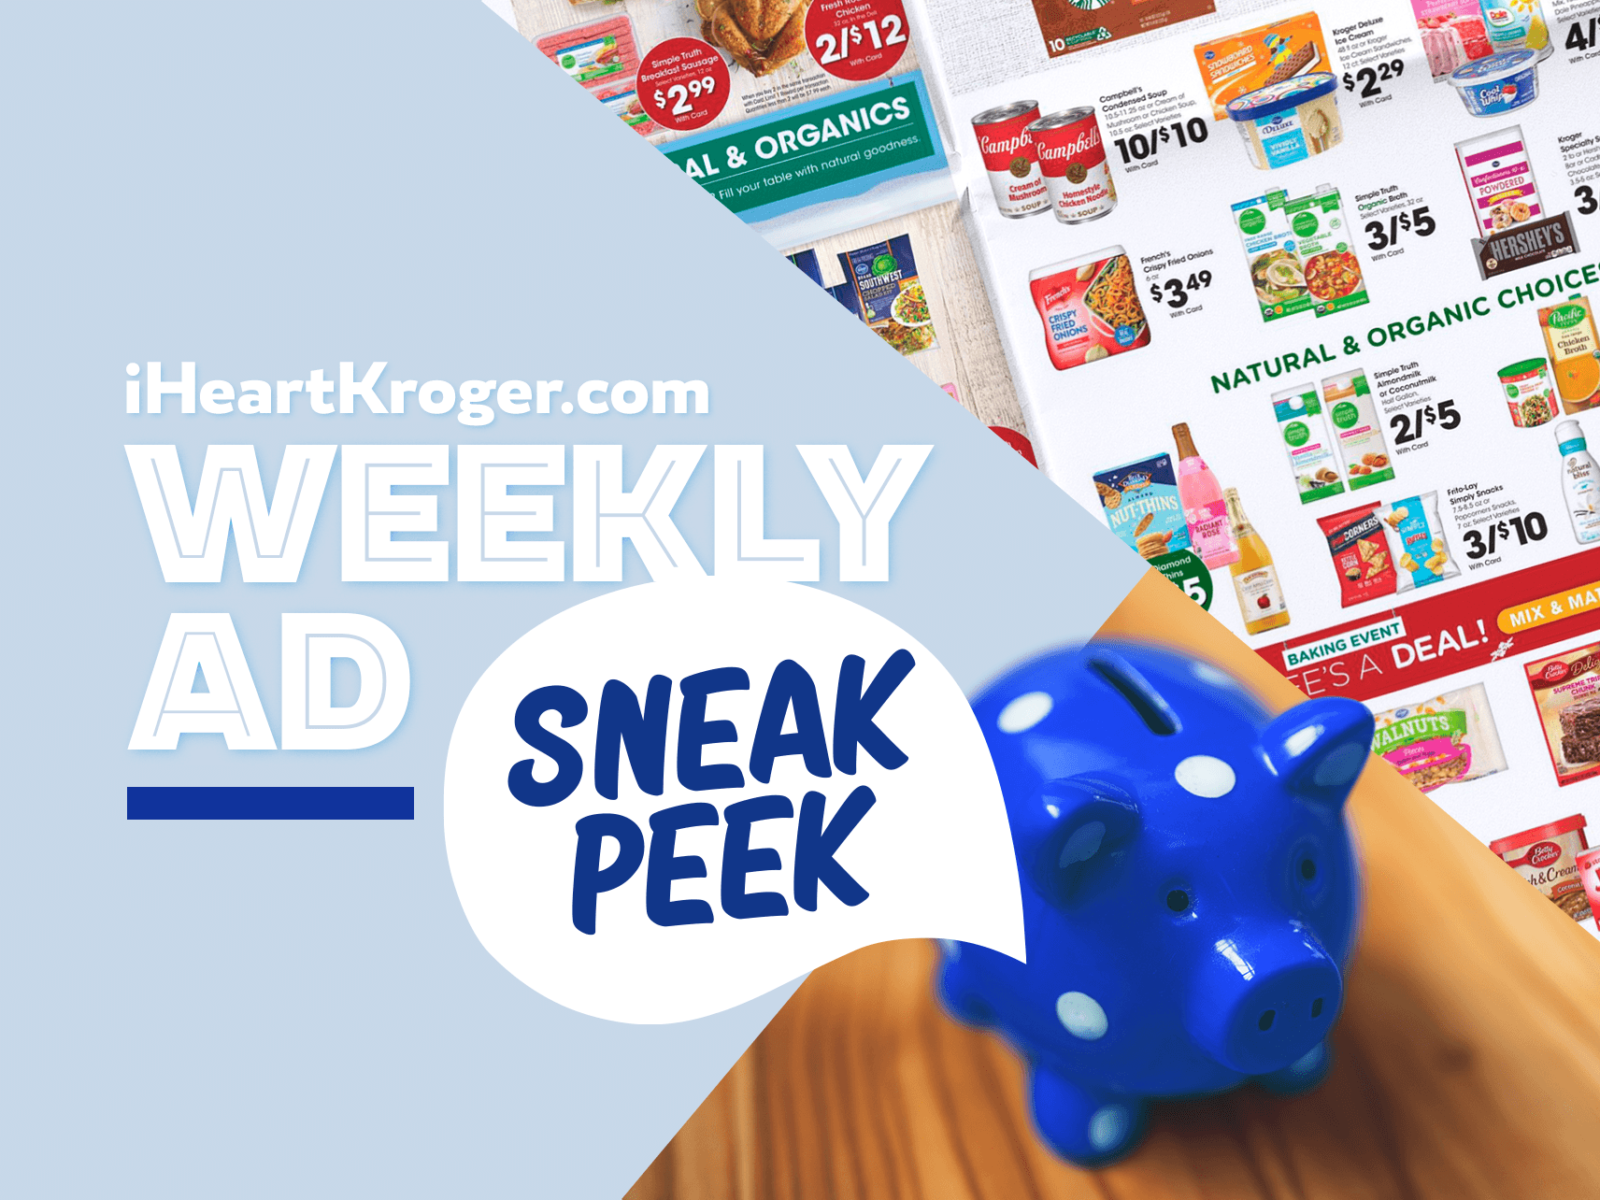 Kroger Ad & Coupons Week Of 4/5 to 4/11 – Mega Sale Continues!